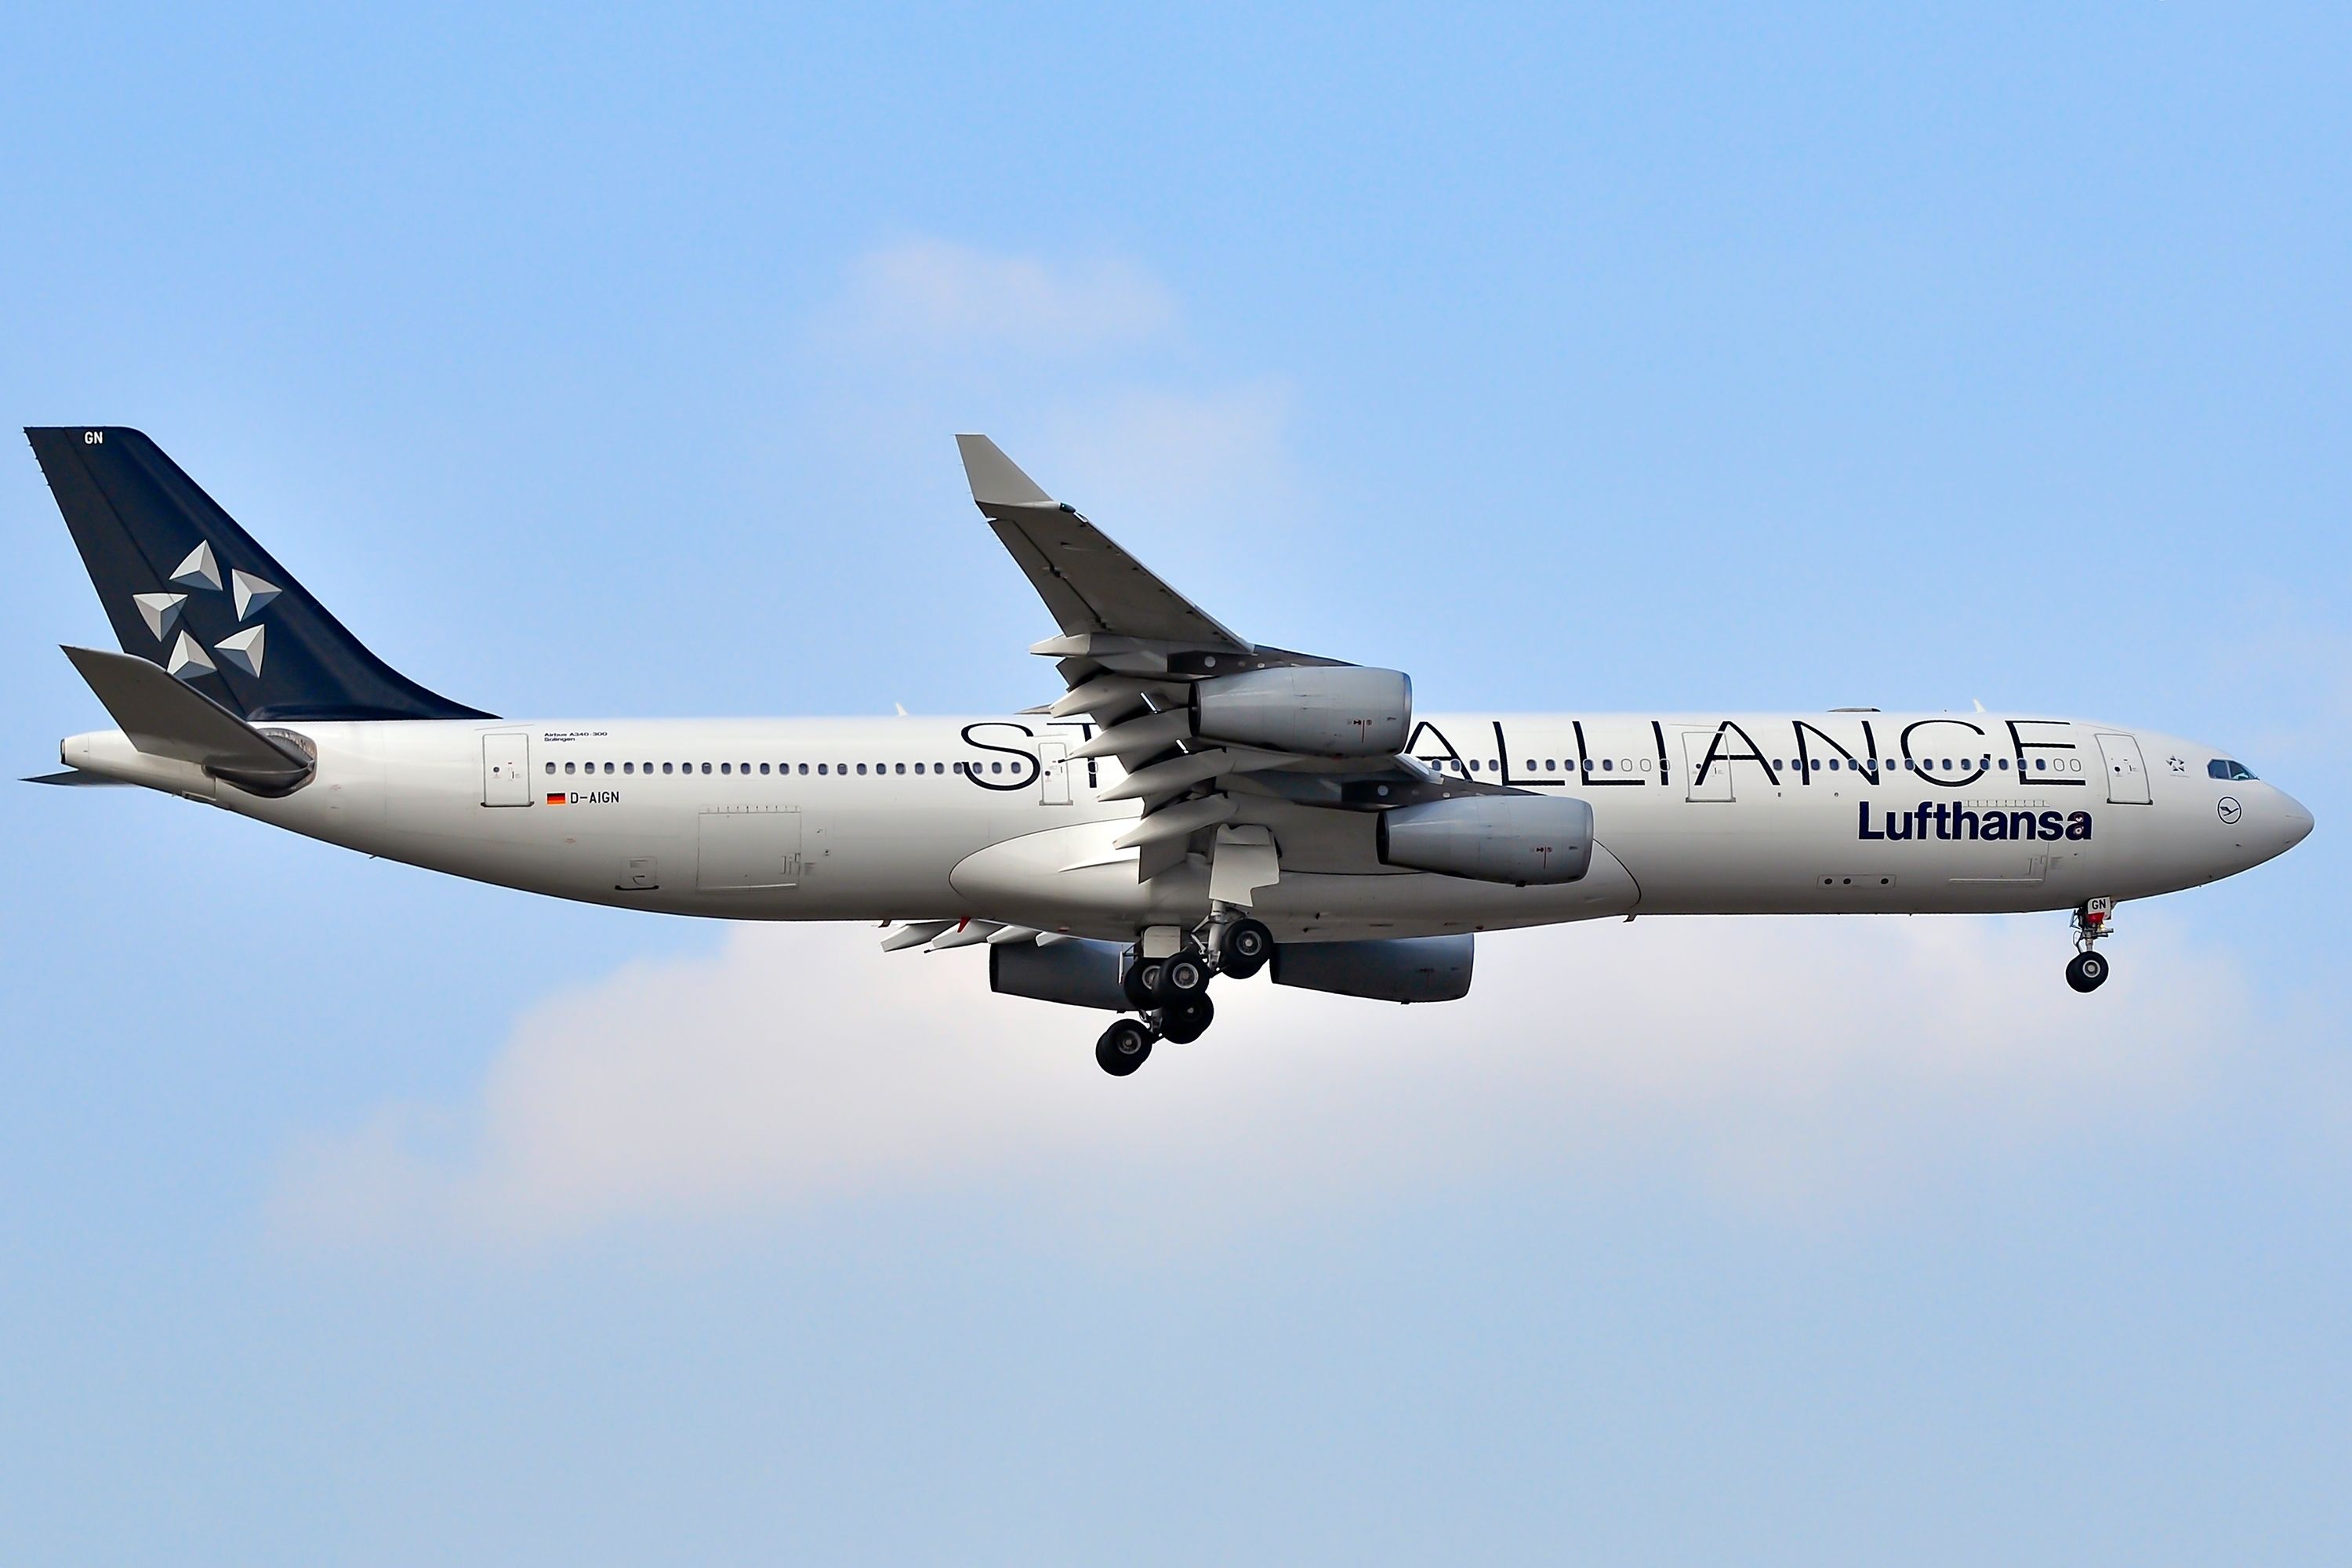 A Lufthansa Airbus A340-200 in Star Alliance Livery flying in the sky.